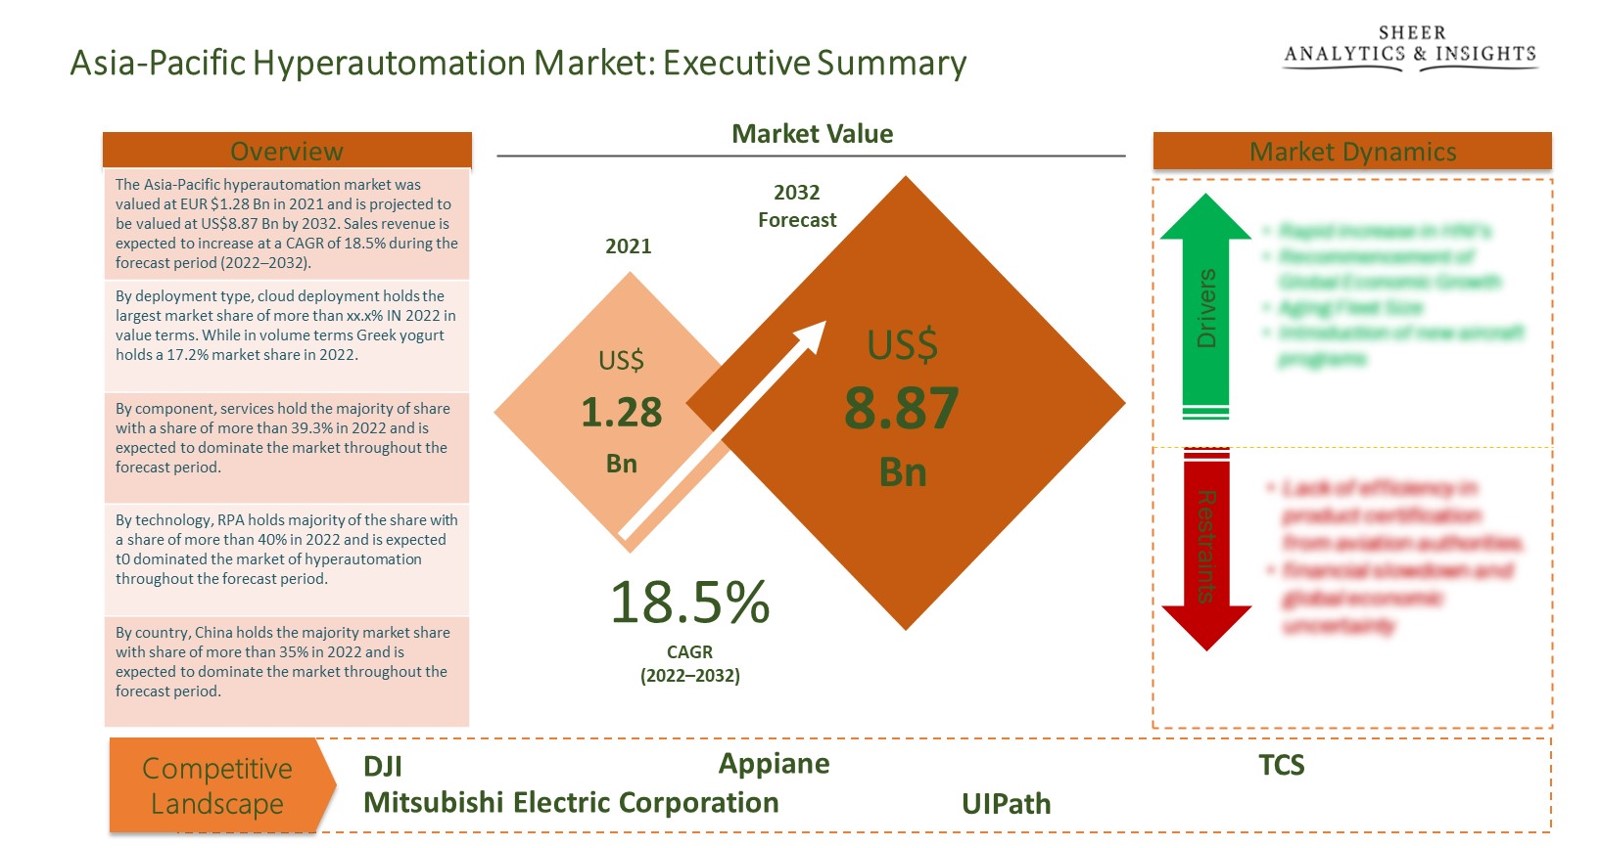 Asia-Pacific Hyper-Automation Market